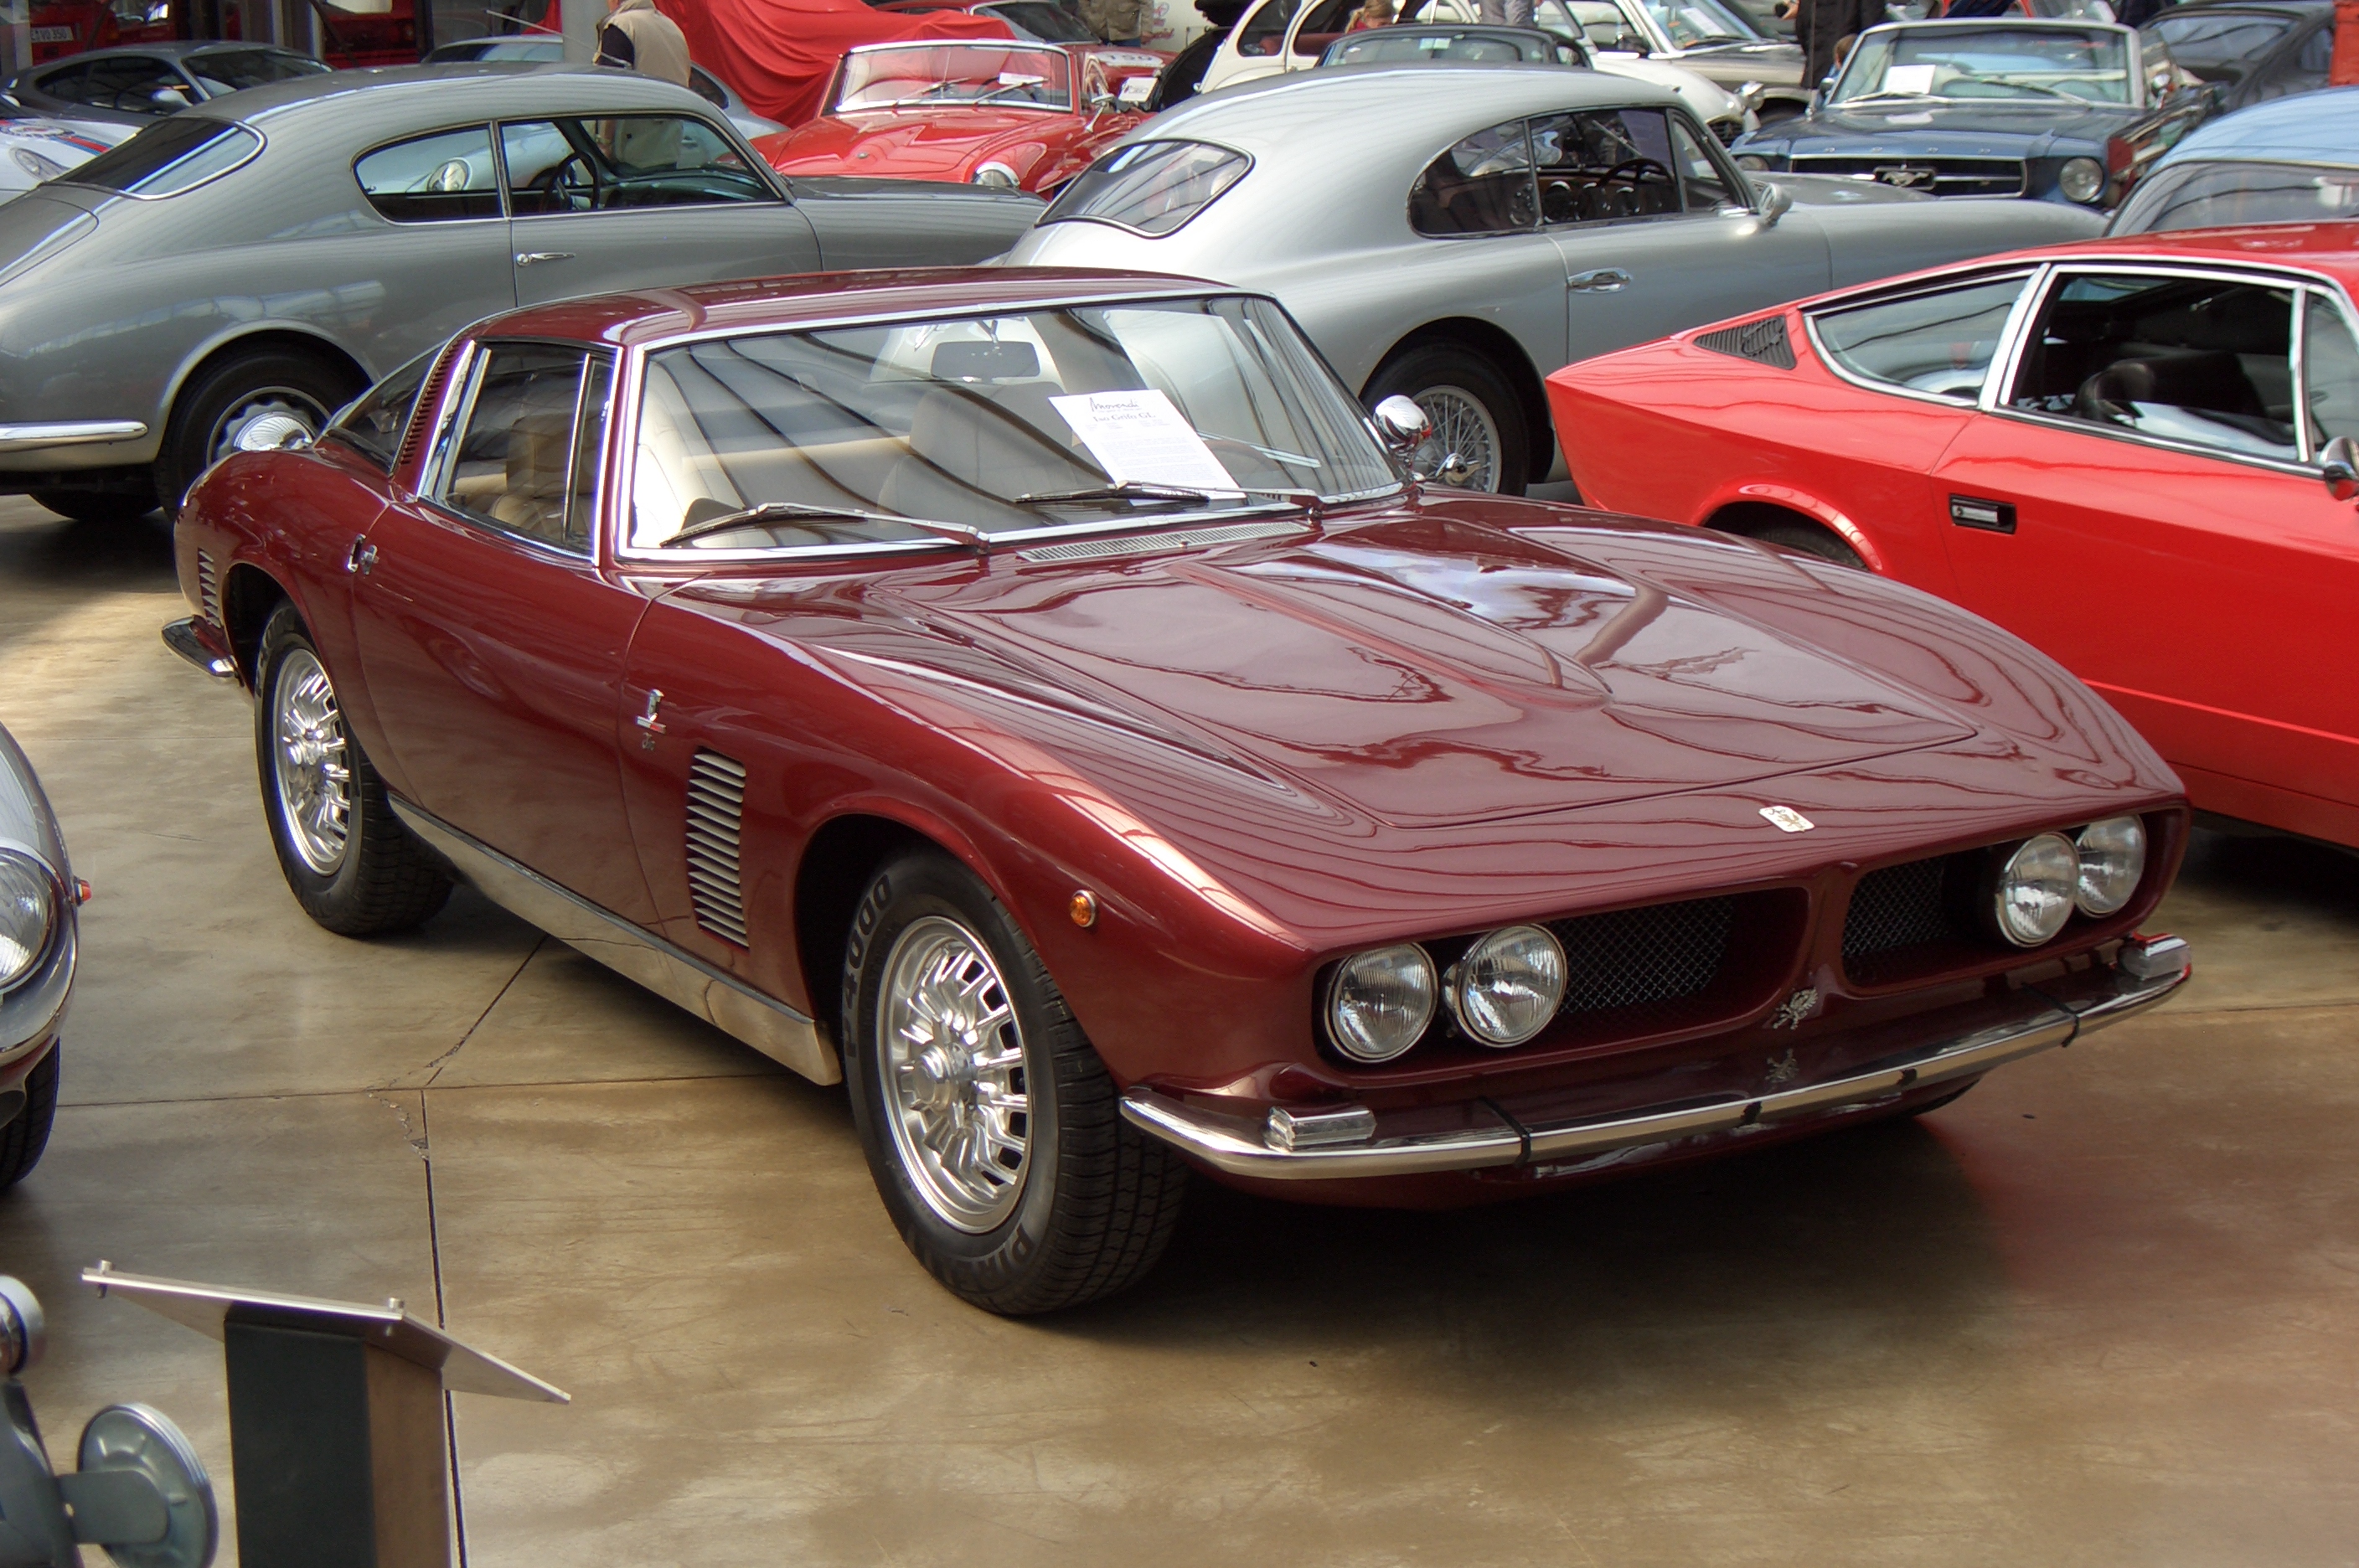 File:ISO Grifo GL 350 000 000 1965-1972 1967 frontright 2012-01-04 ...